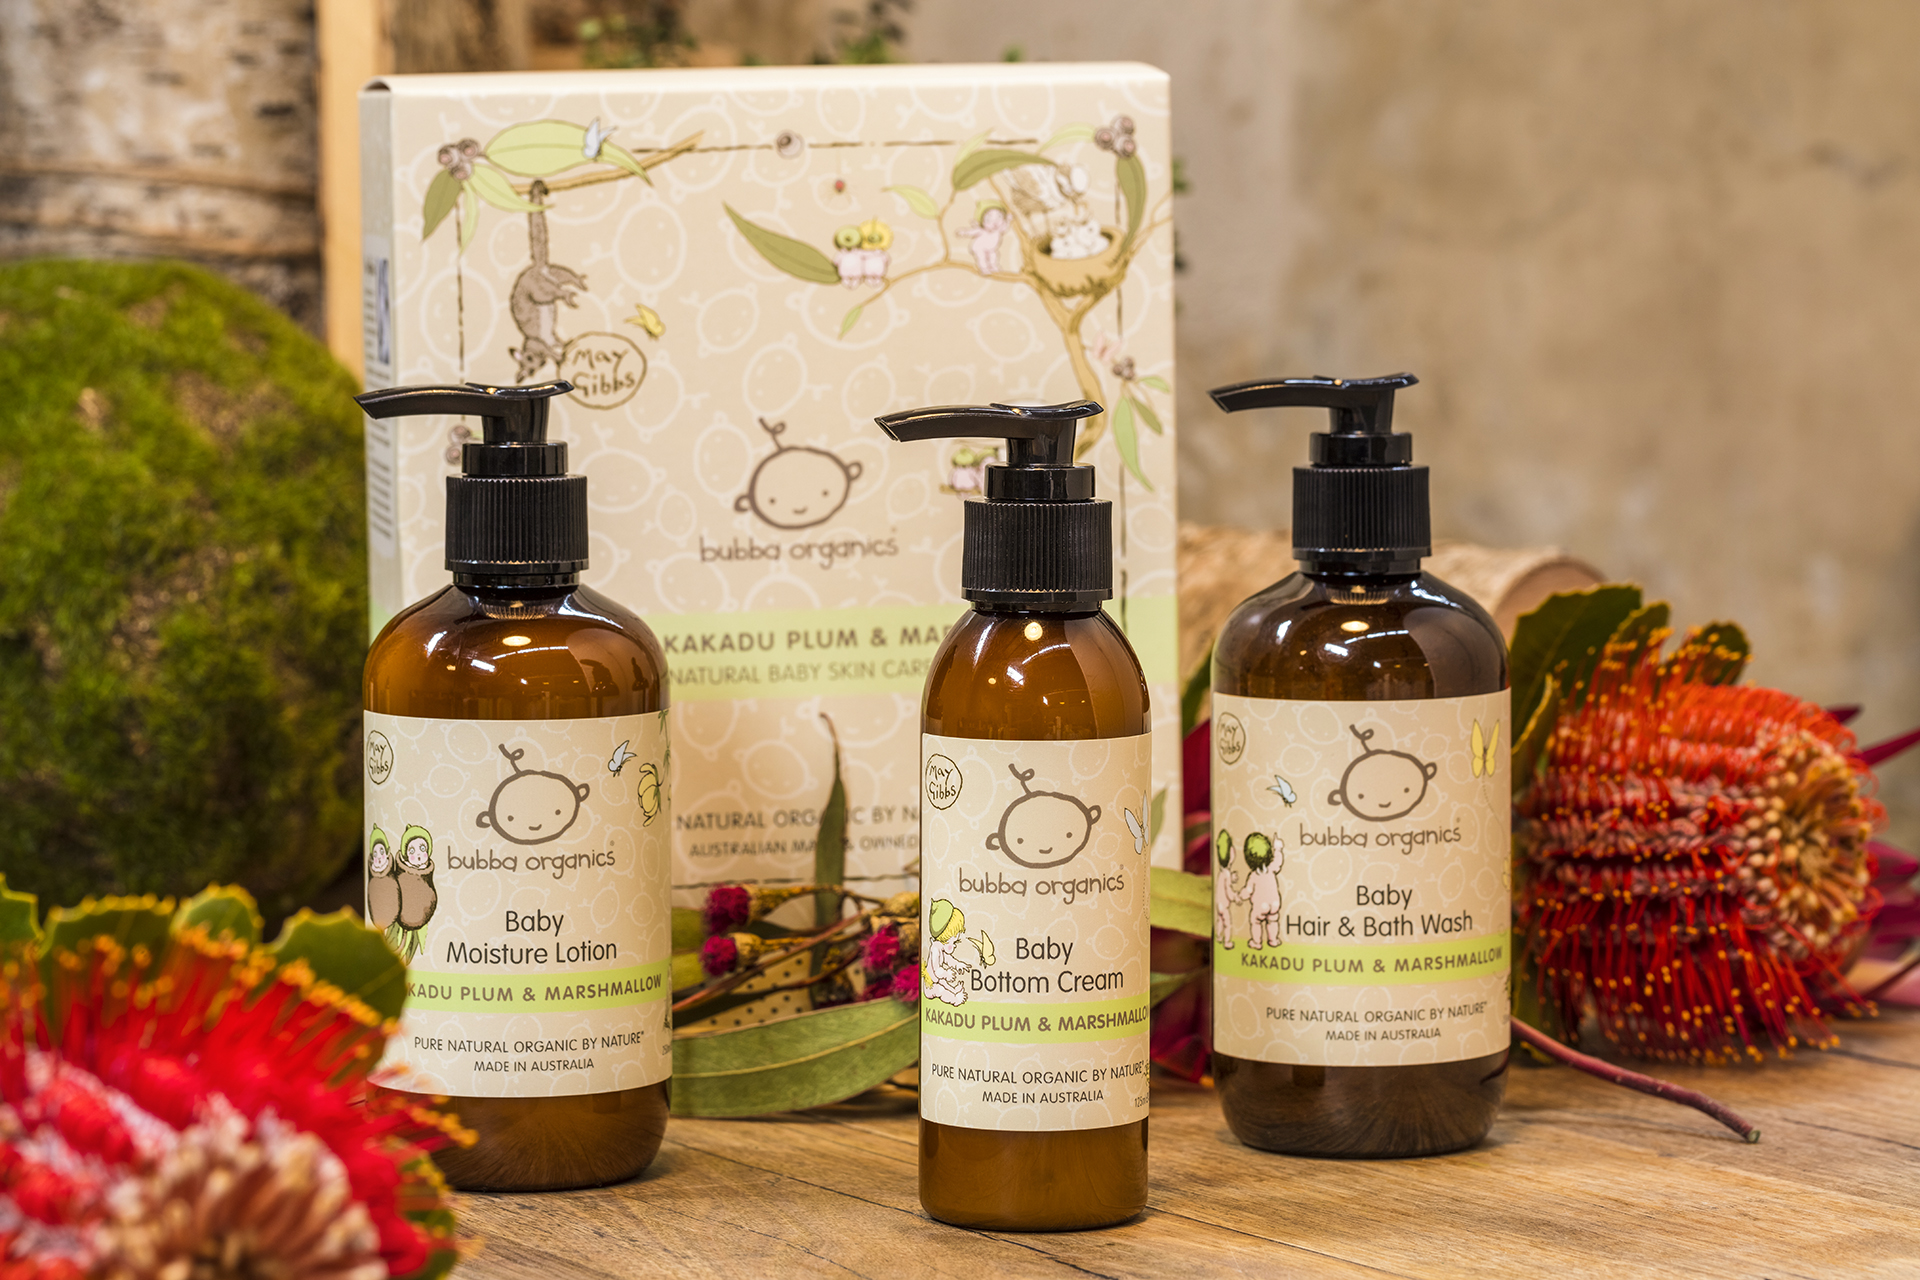 Bubba Organics Releases May Gibbs Branded Natural and Organic Baby Skin Care Range